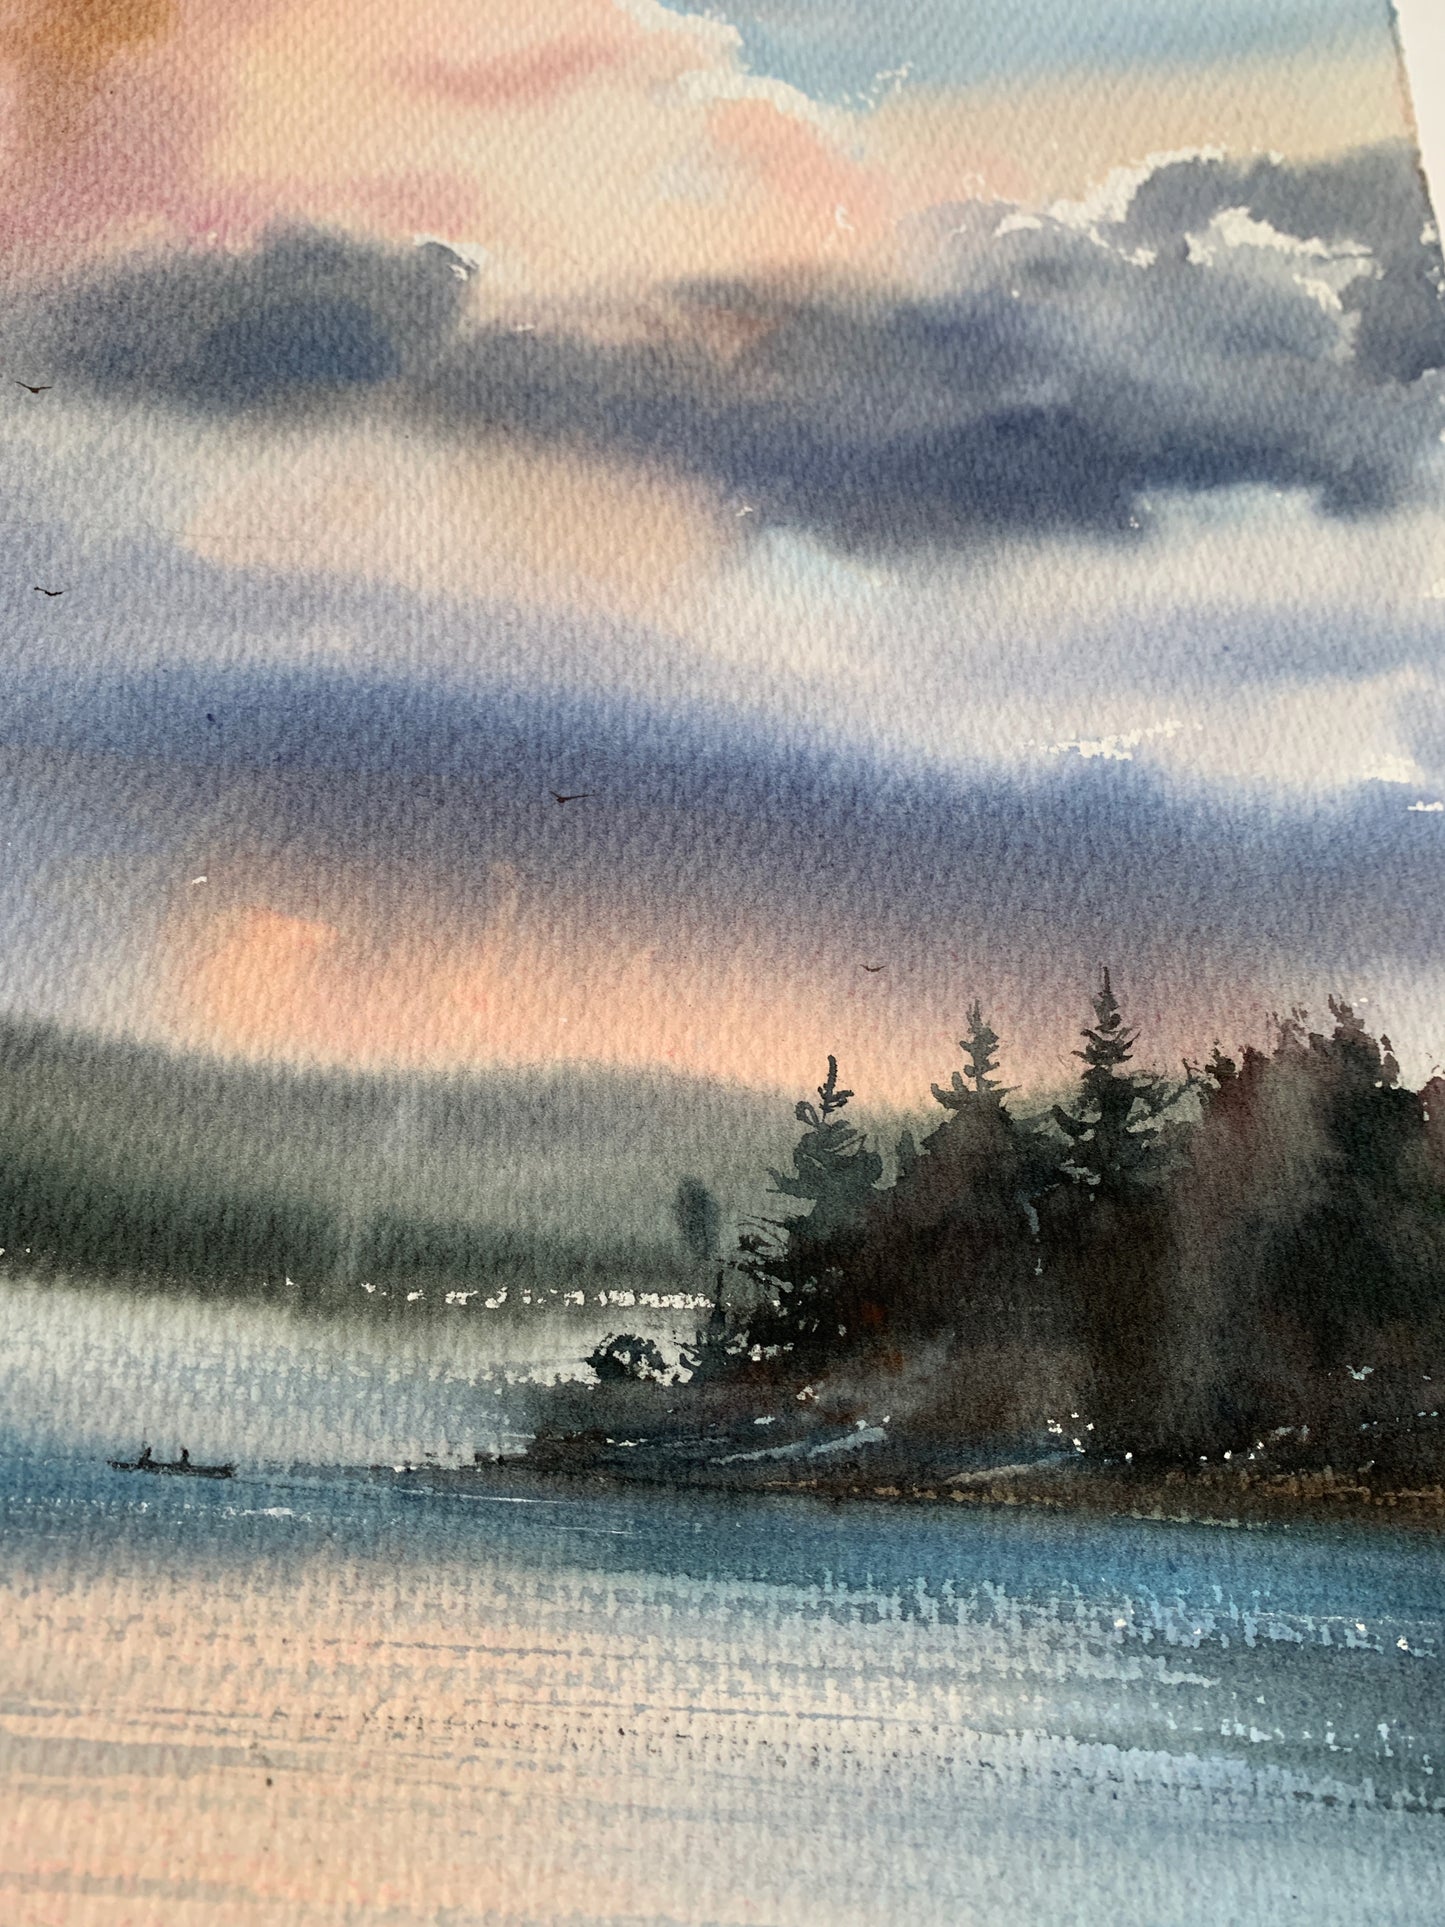 Painting Original Watercolor - Lake and clouds - 22 x 15 in